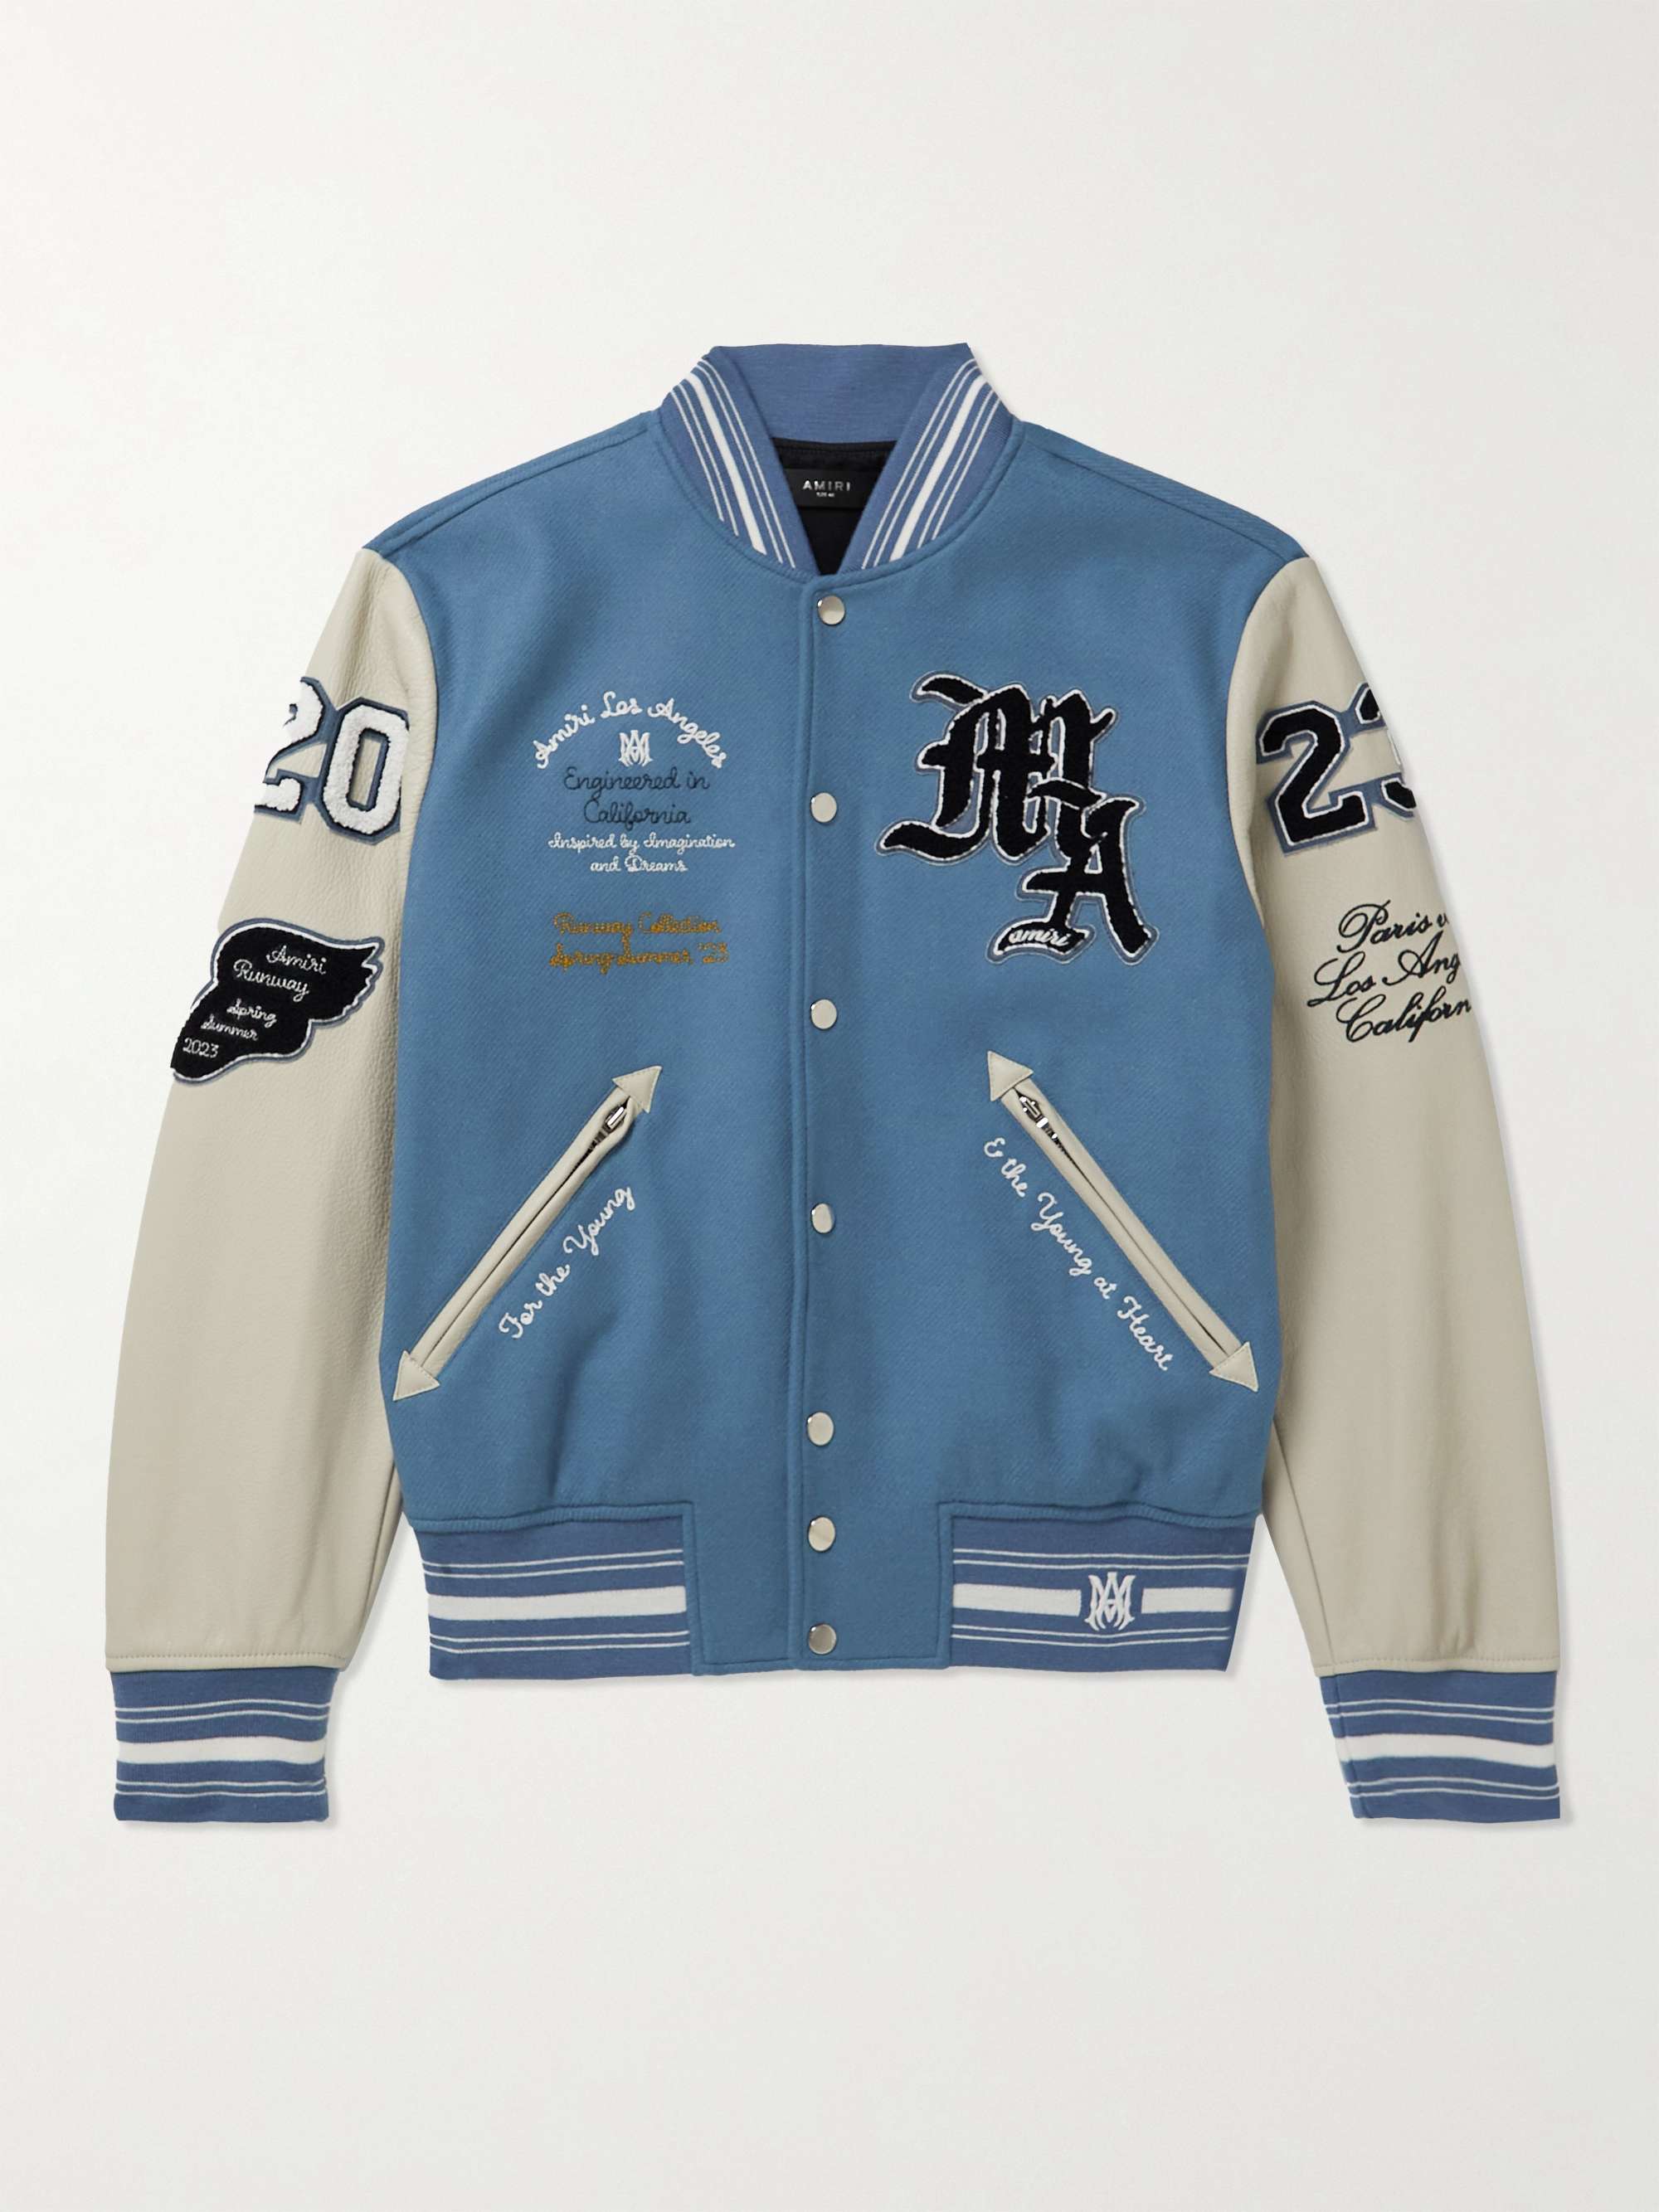 AMIRI Appliquéd Embroidered wool-blend and Leather Varsity Jacket - Men - Blue Coats and Jackets - M